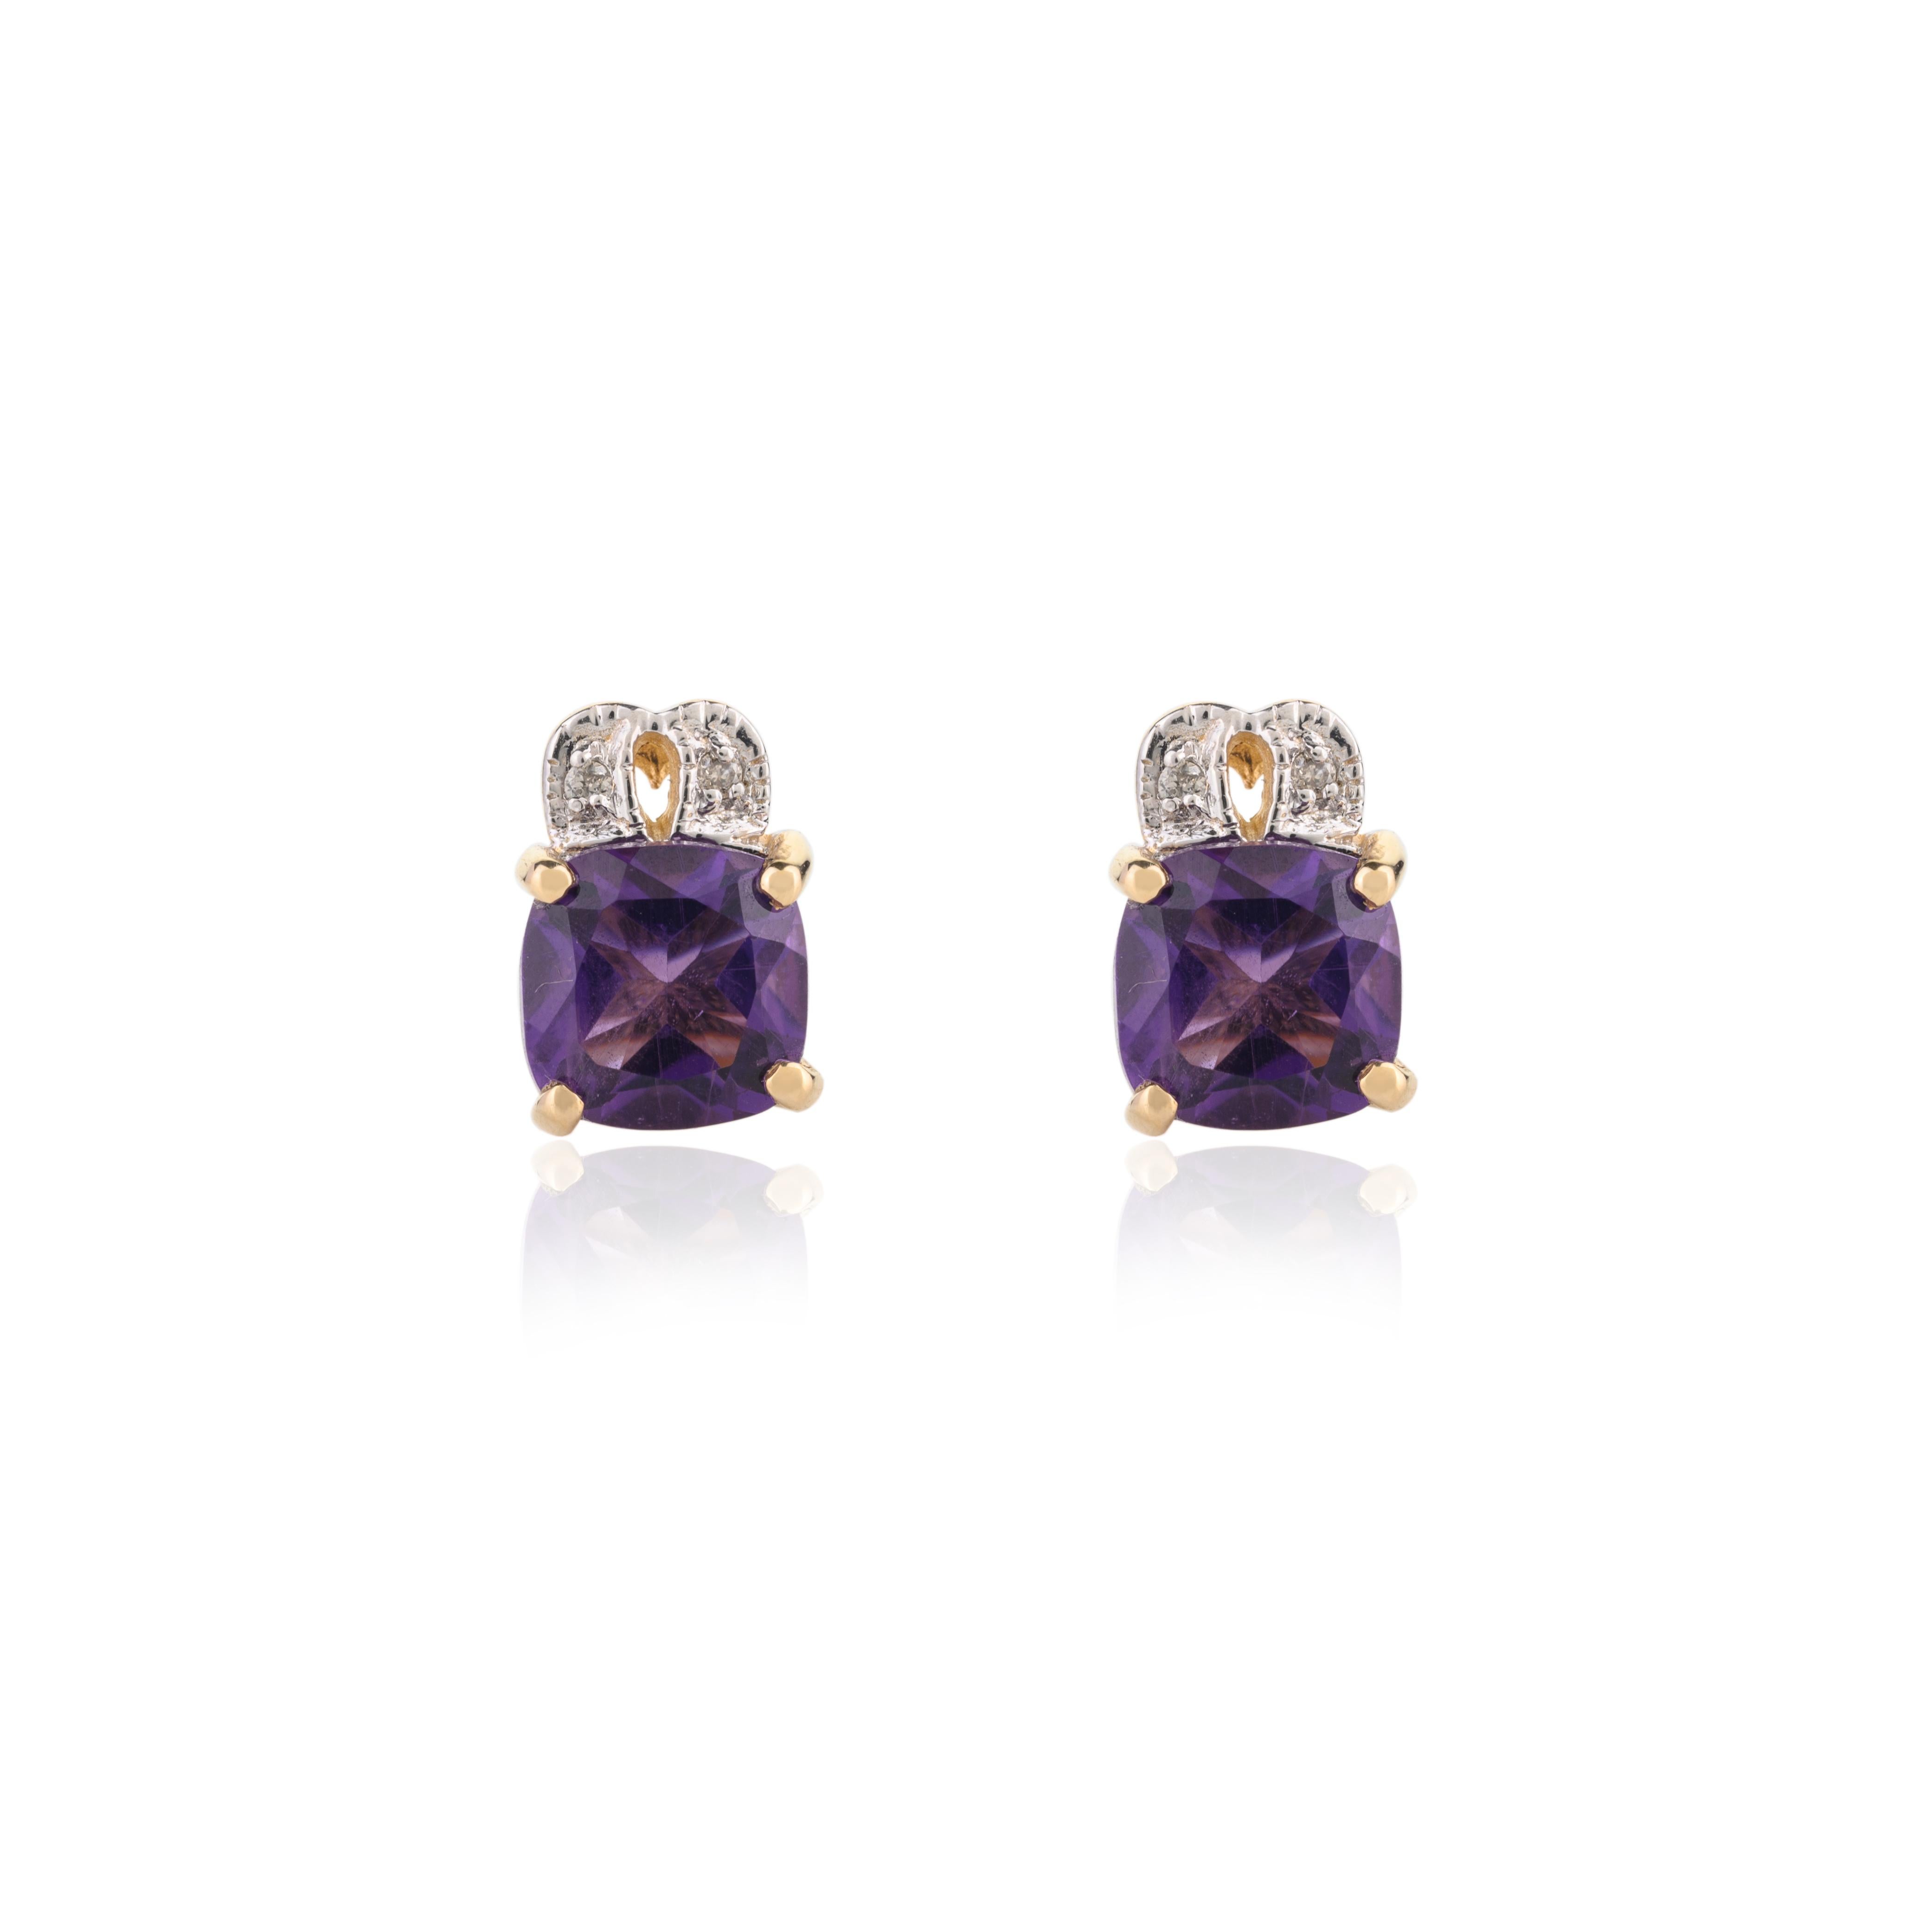 Natural Amethyst and Diamond Stud Earrings Set in 14k Yellow Gold For Sale 2